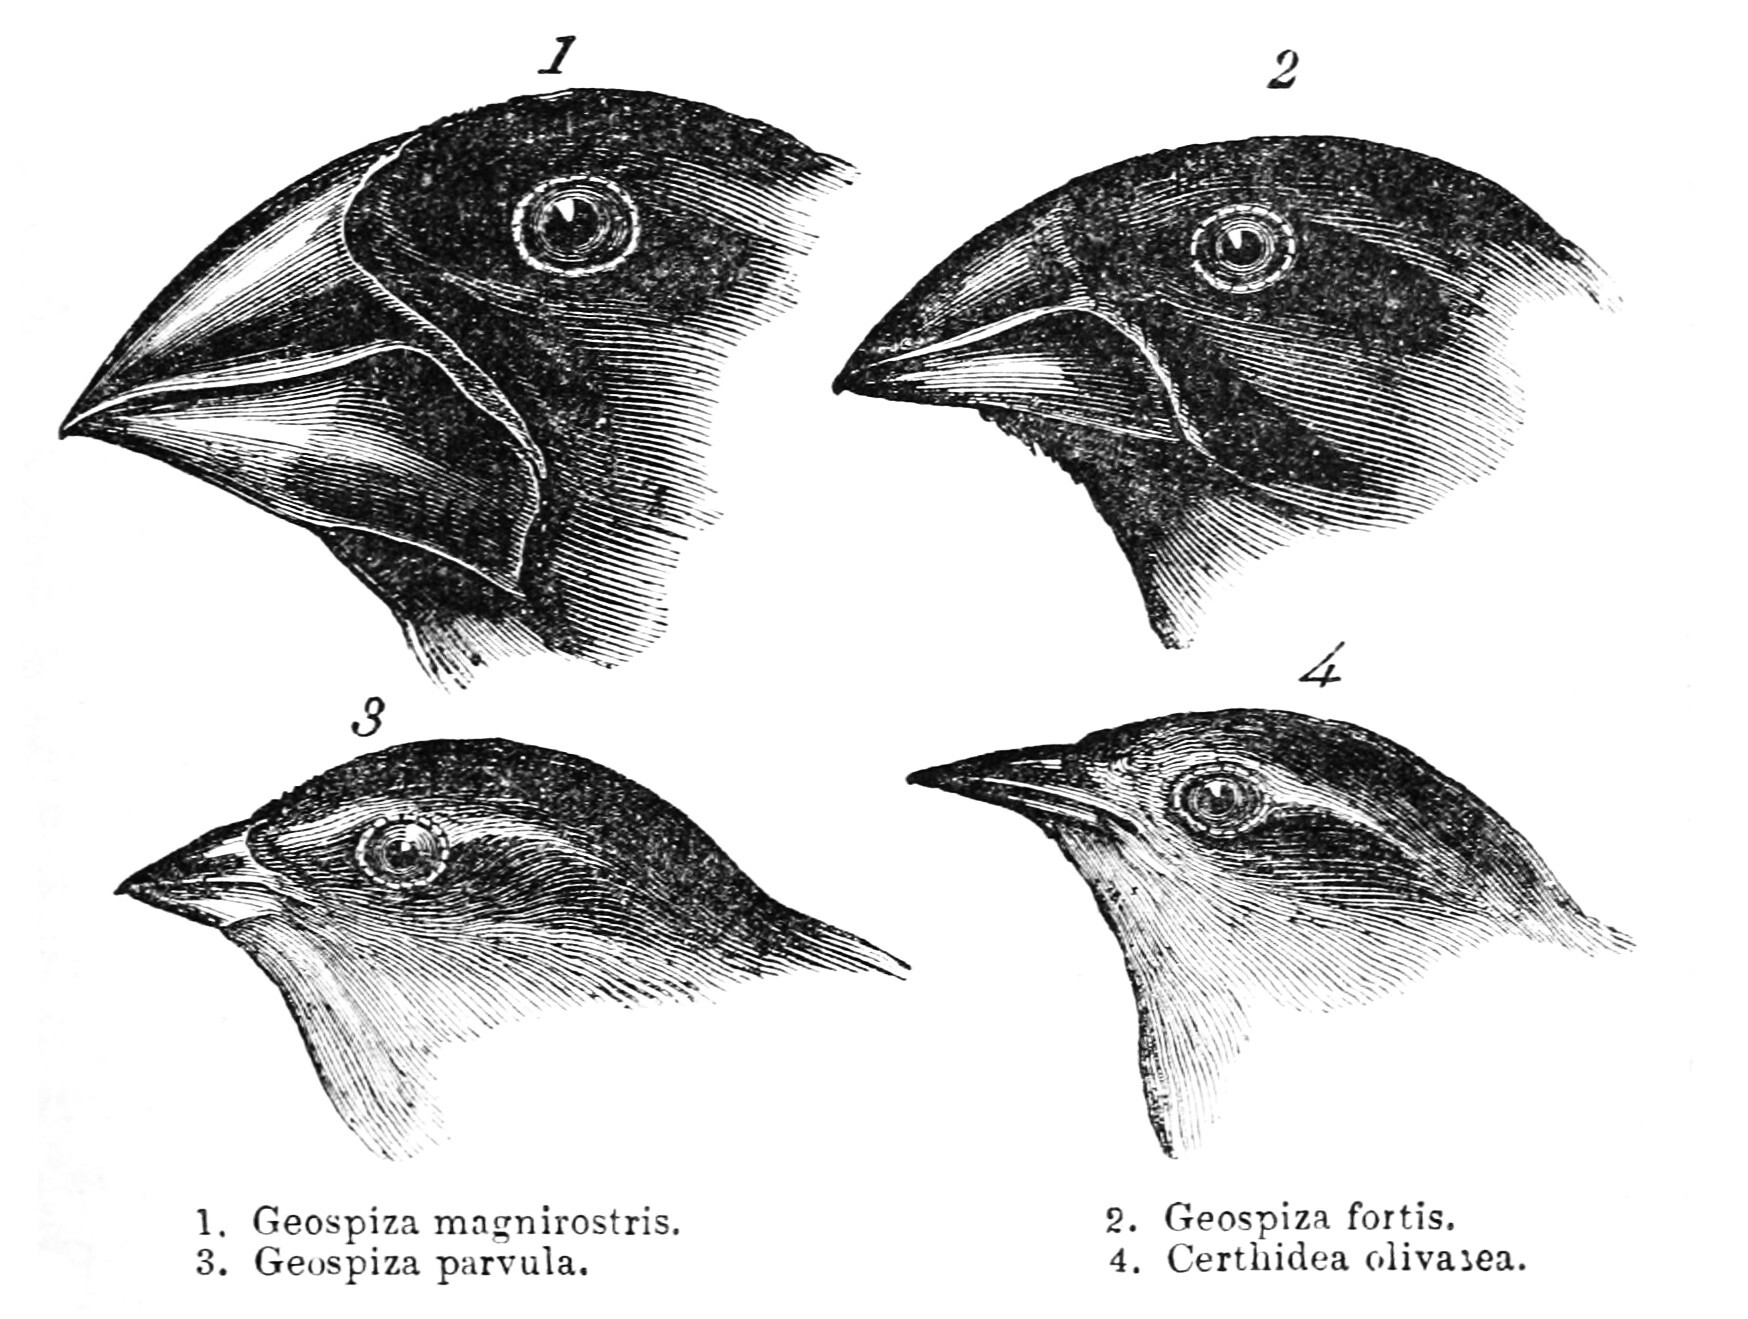 Drawing of four species of Galapagos Finches, showing the different beak shapes